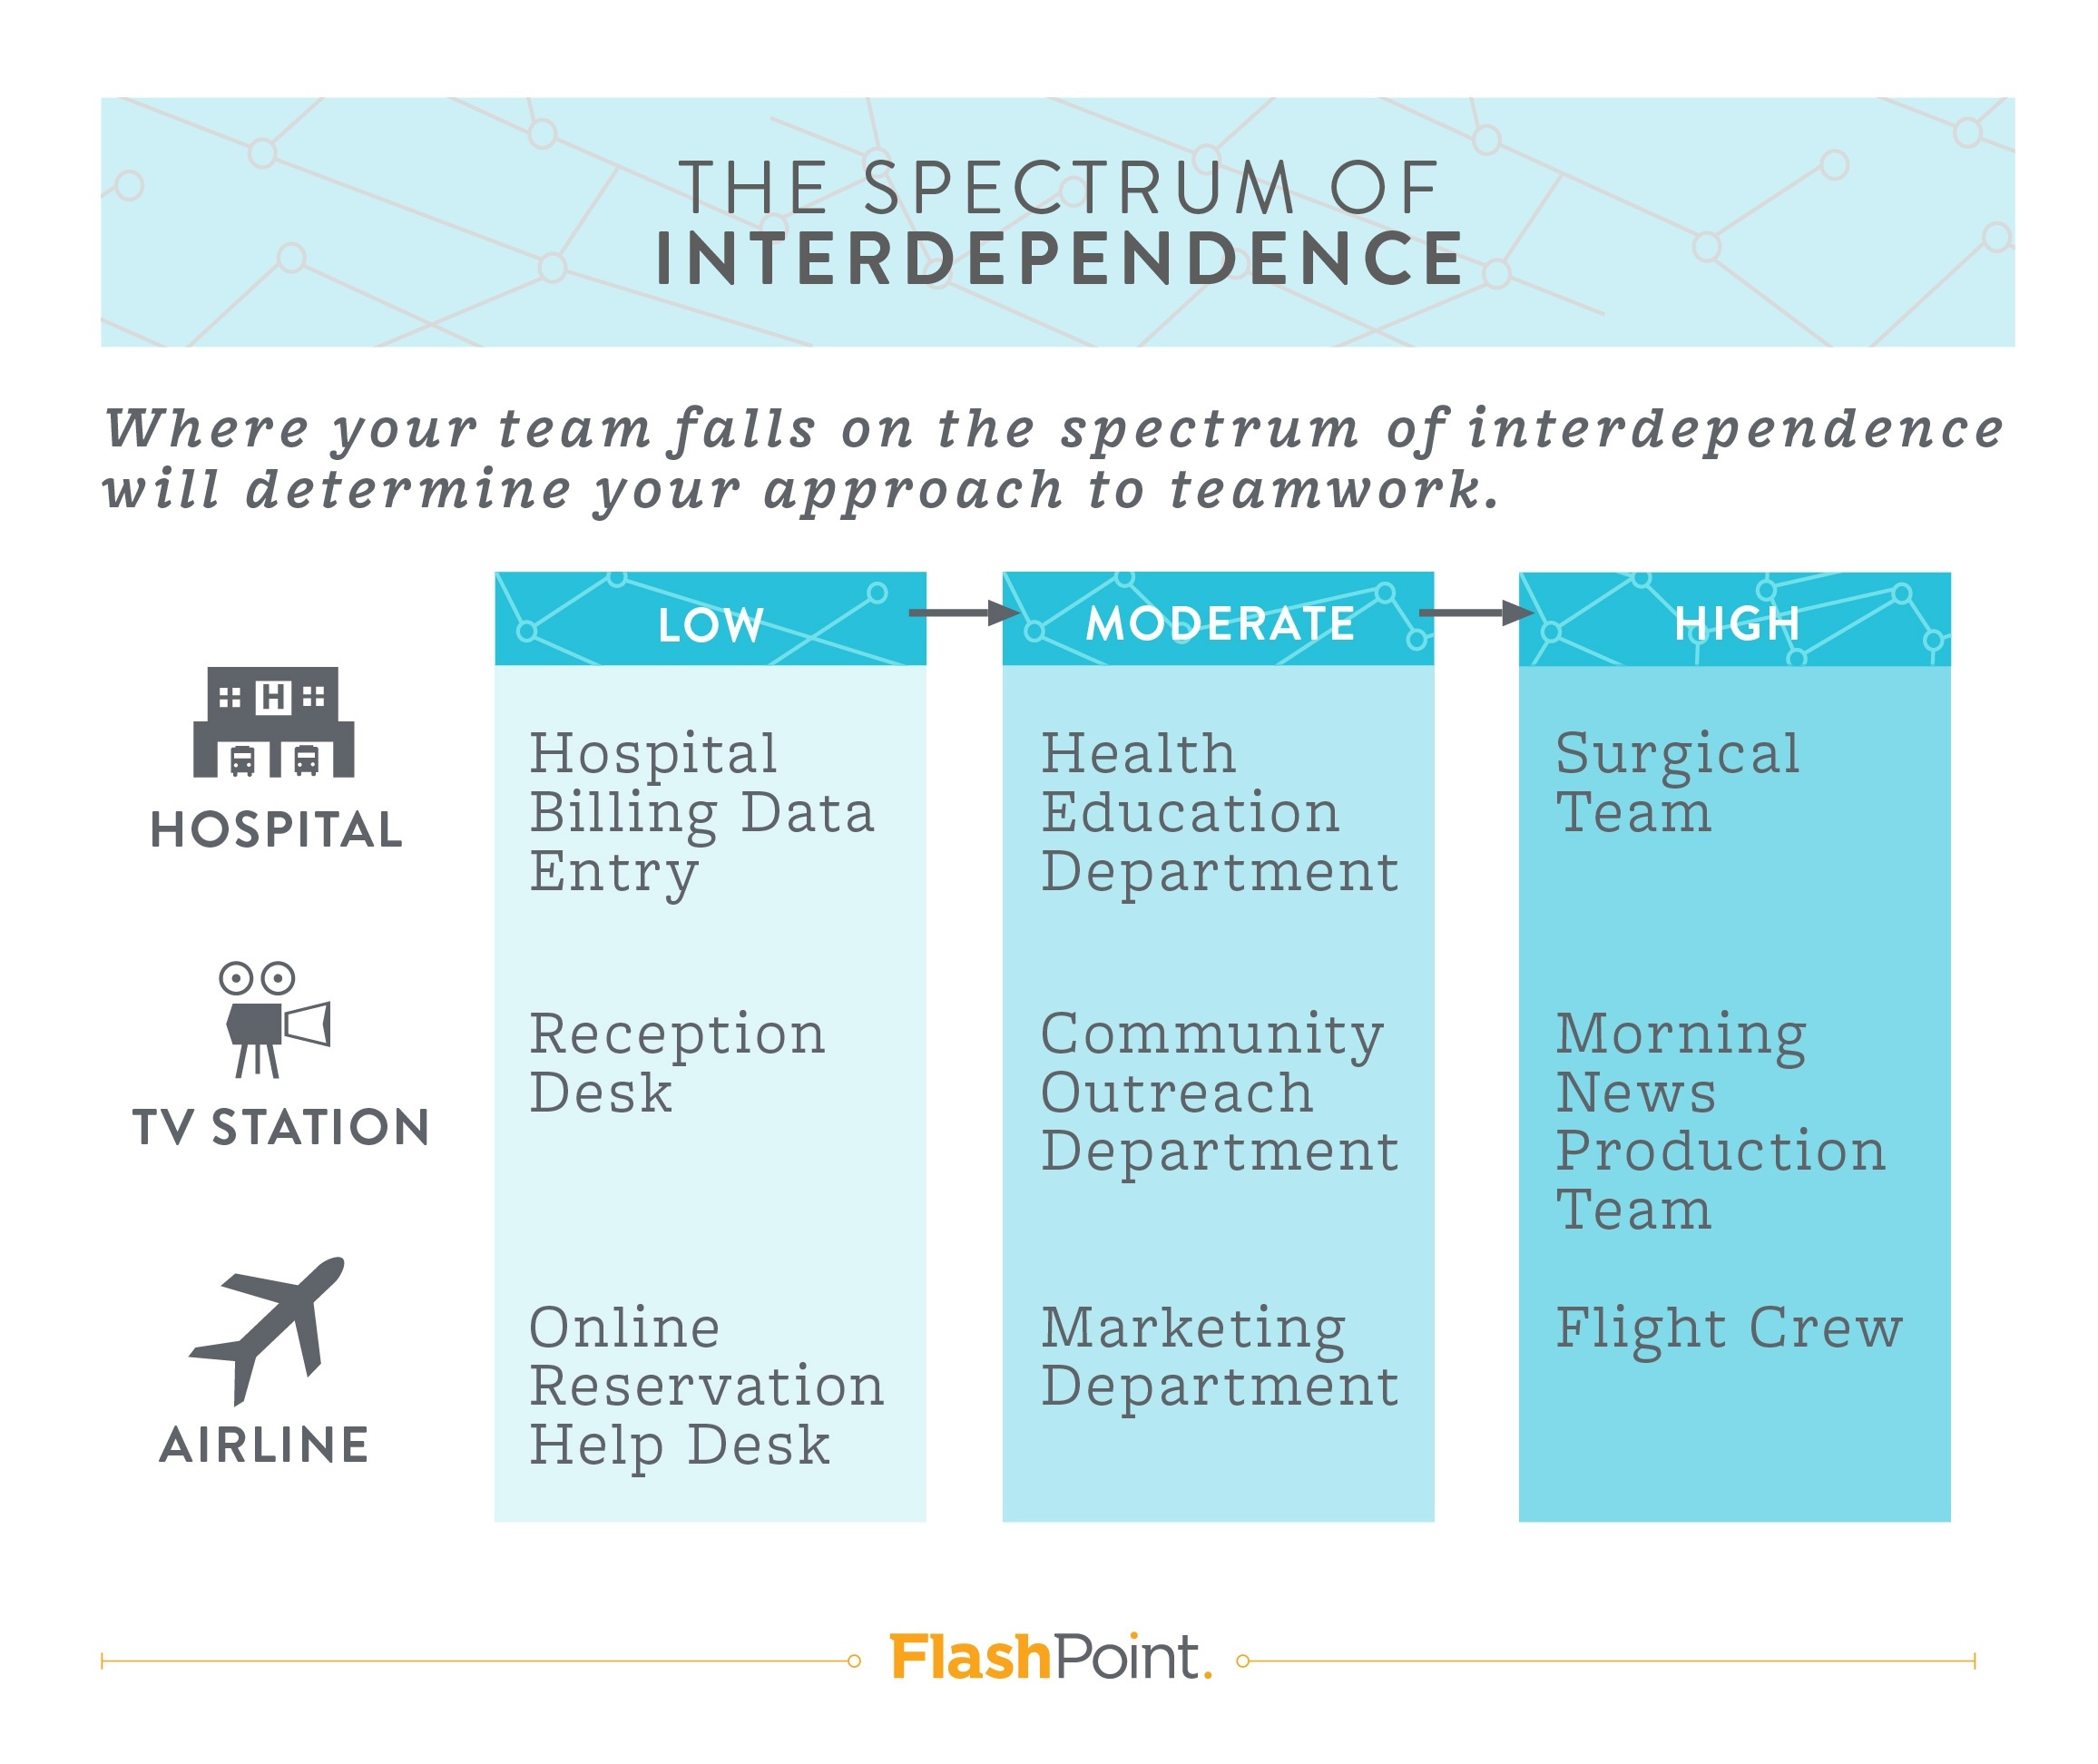 Your Team's Place on the Spectrum of Interdependence